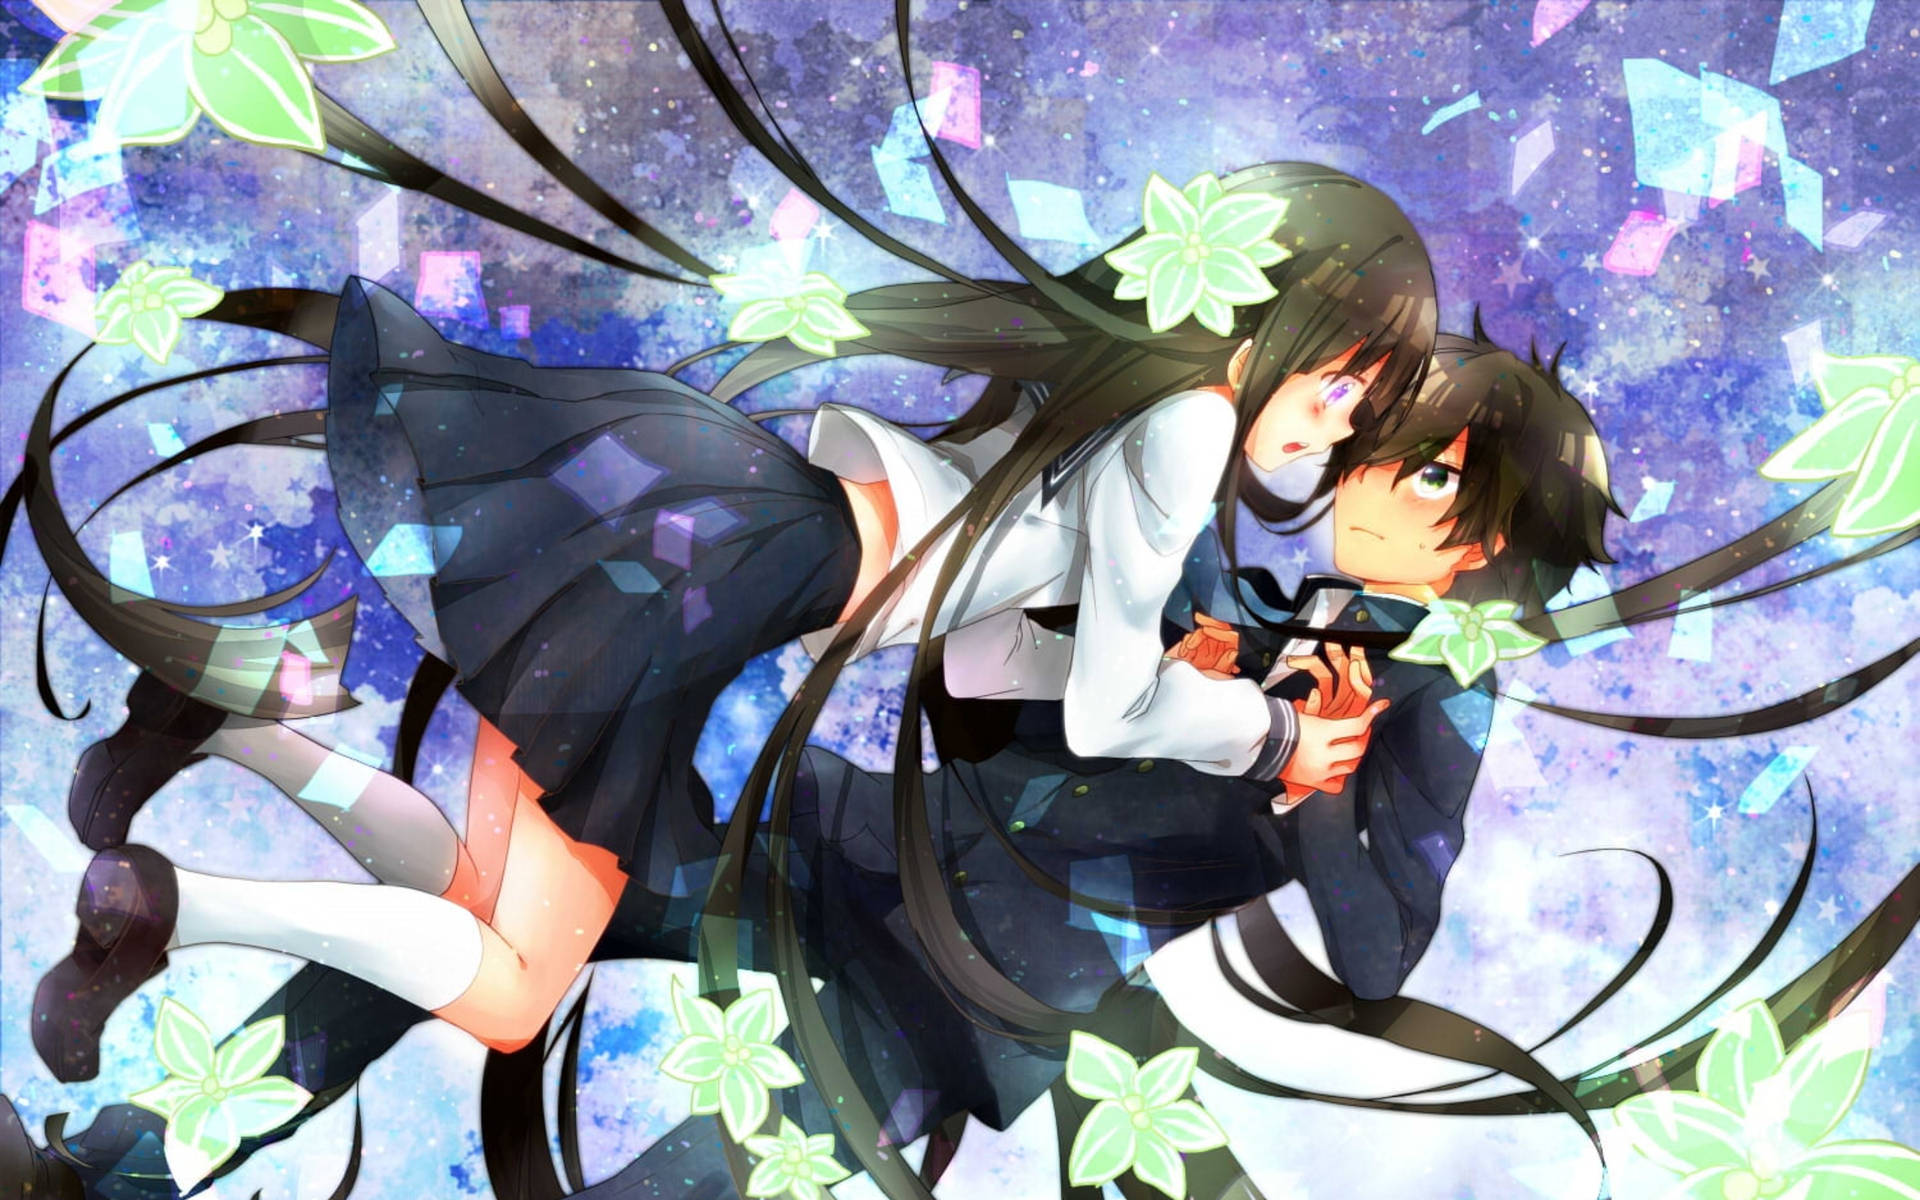 Cute Anime Couple With Green Flowers